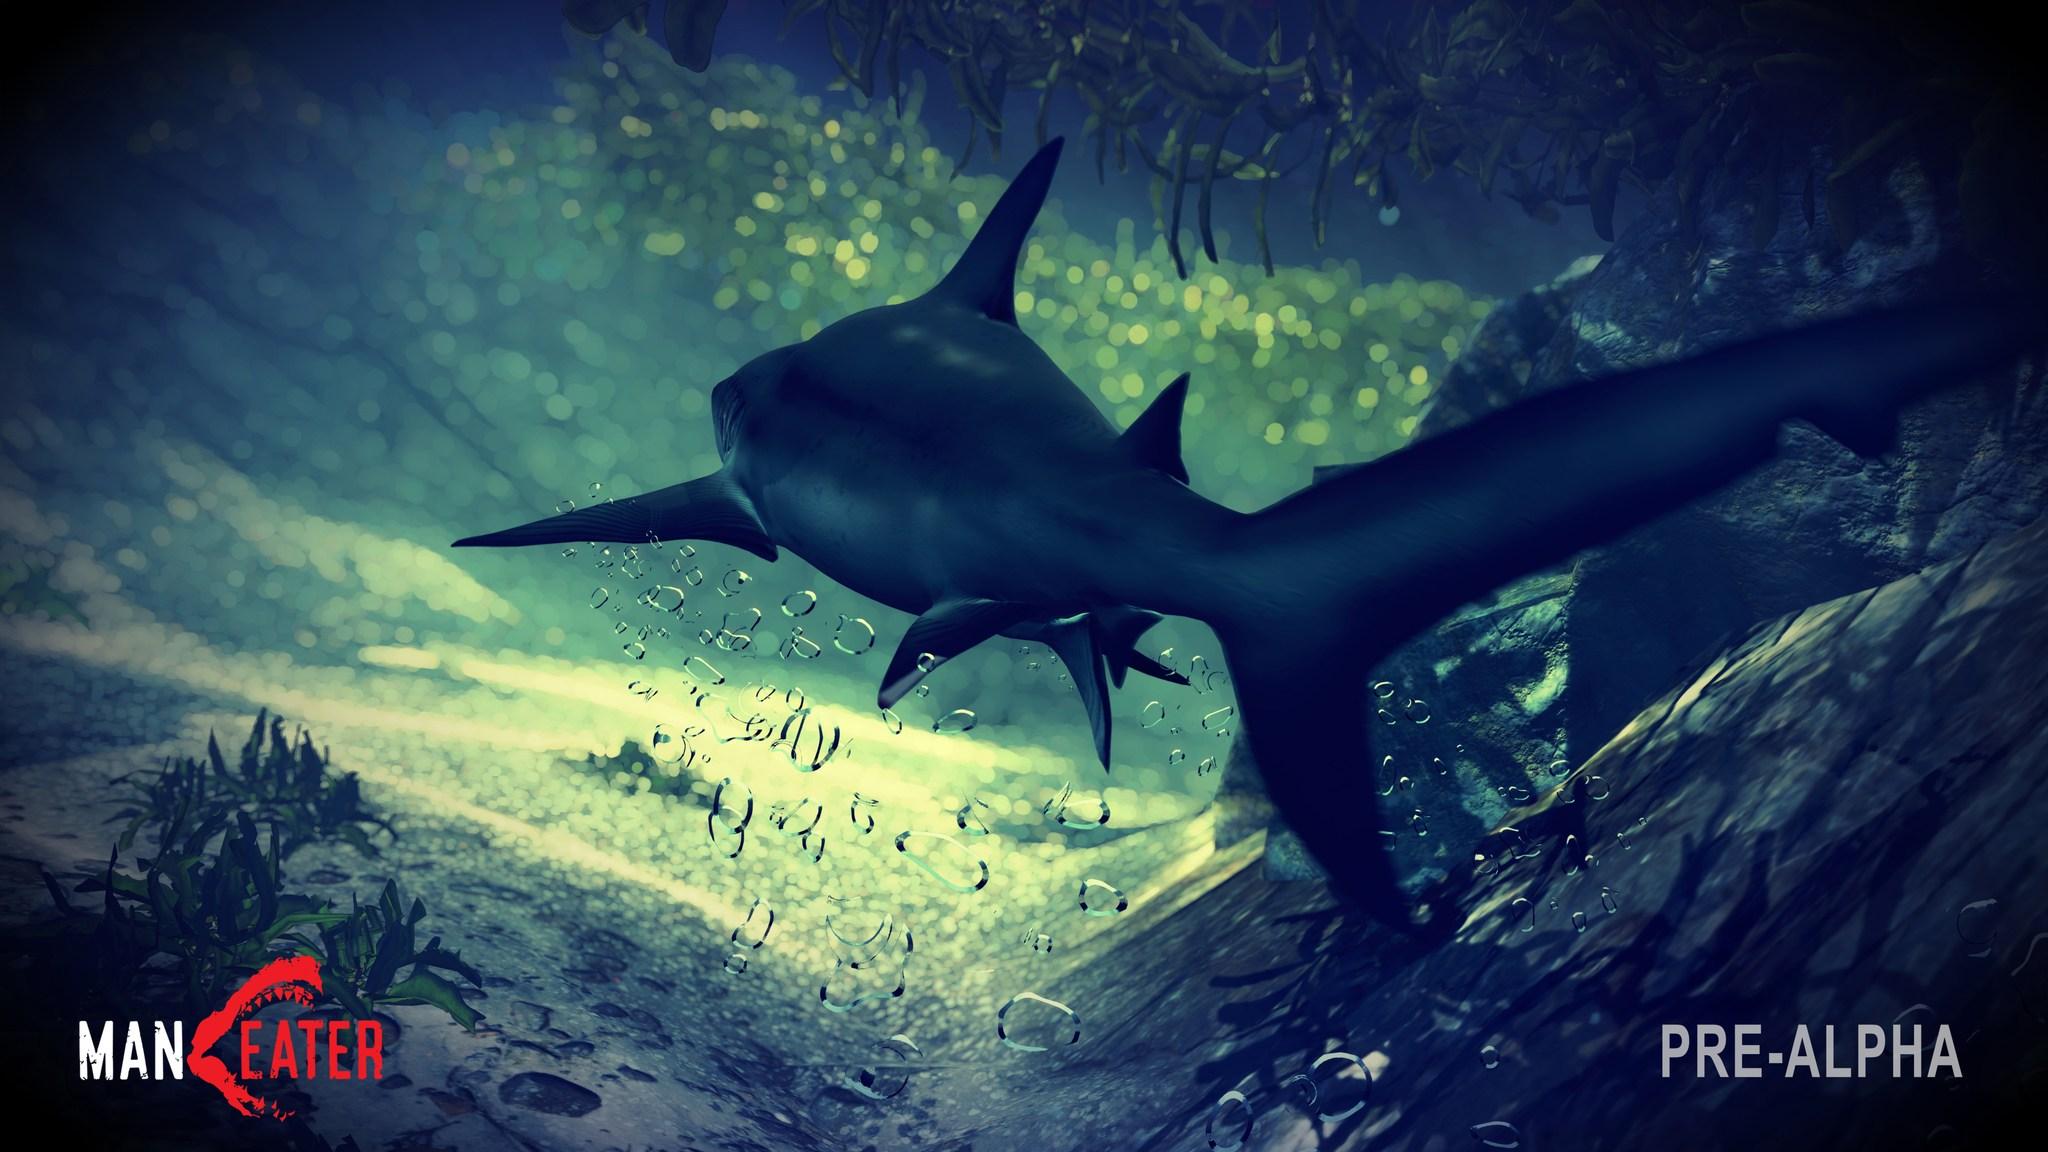 Jaws Unleashed in New Image from Video Game 'Maneater, ' Where You